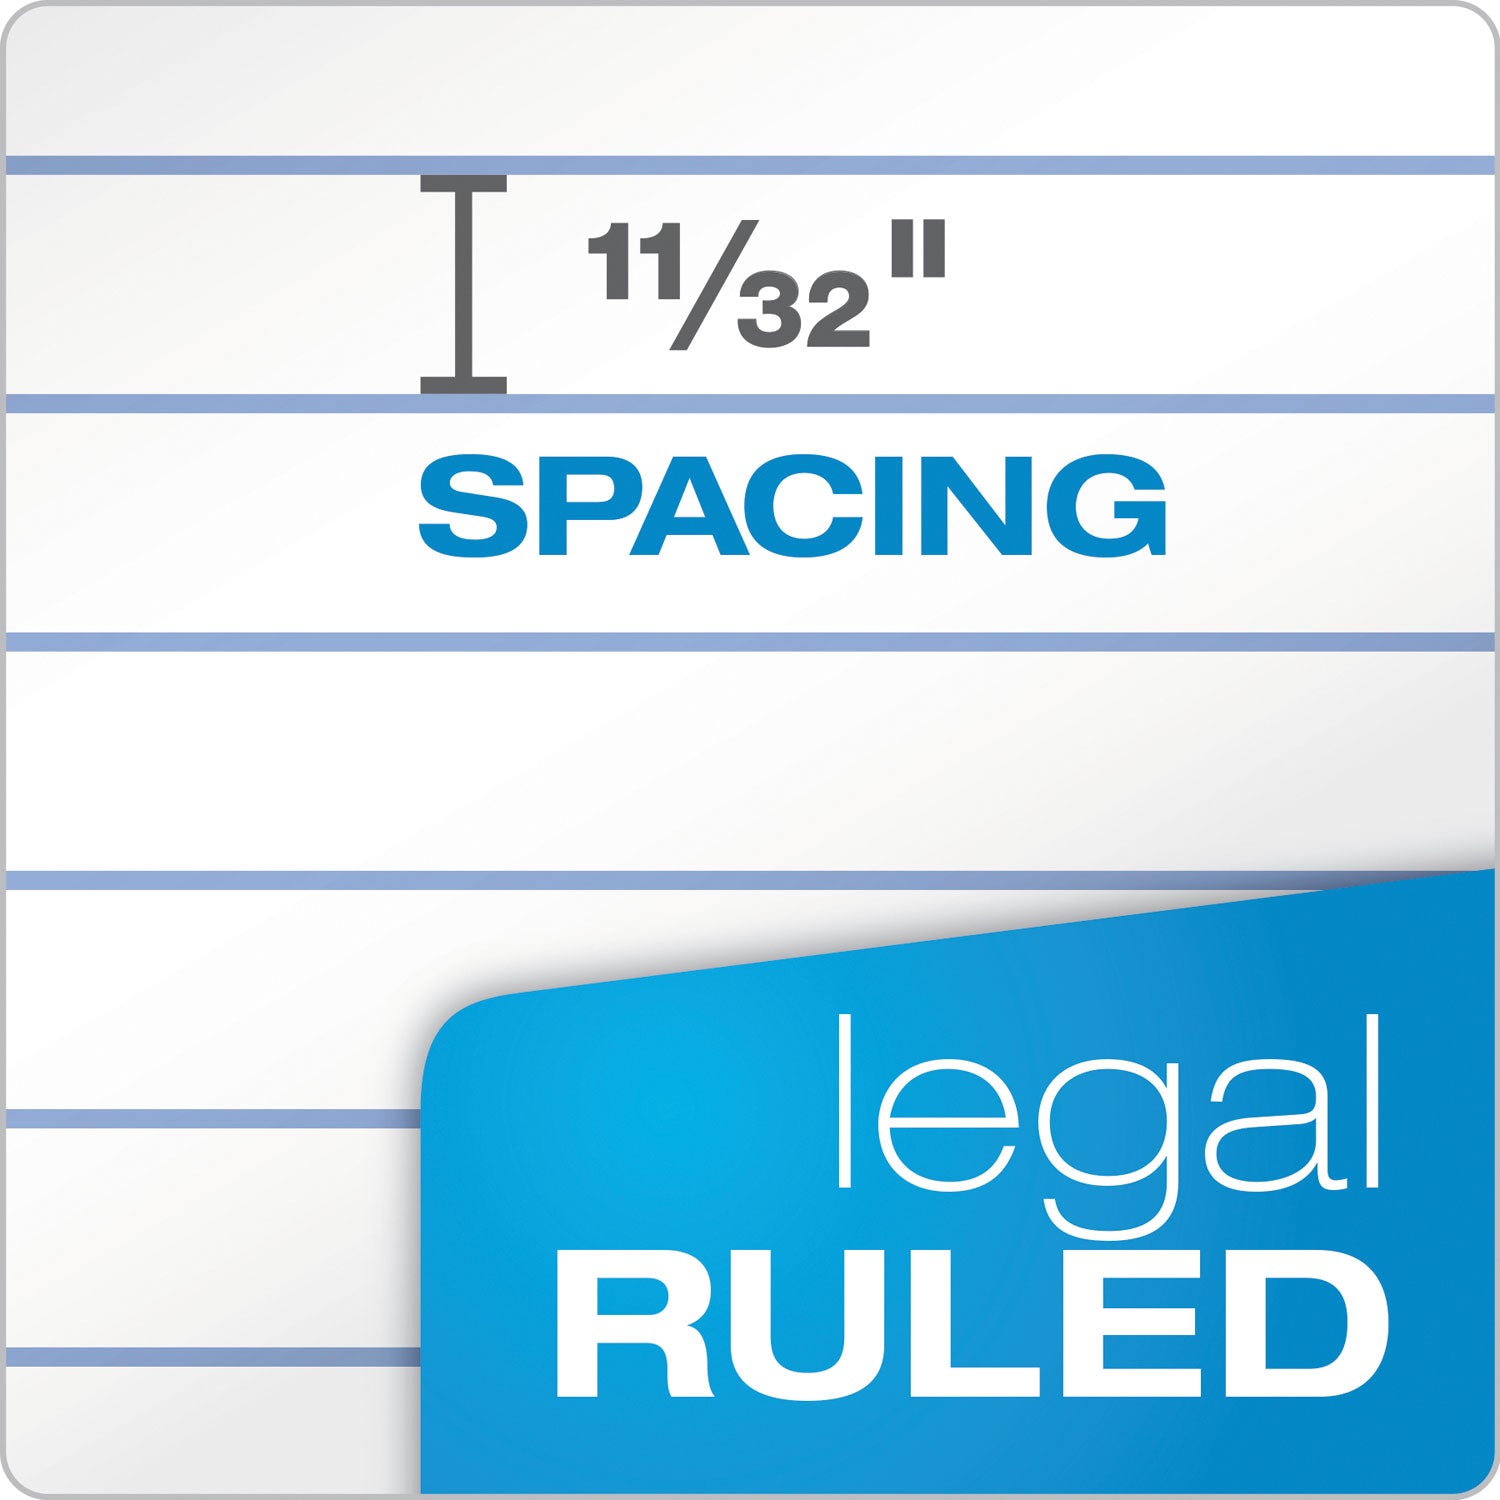 The Legal Pad" Ruled Perforated Pads, Wide/Legal Rule, 50 White 8.5 x 11.75 Sheets, Dozen - 